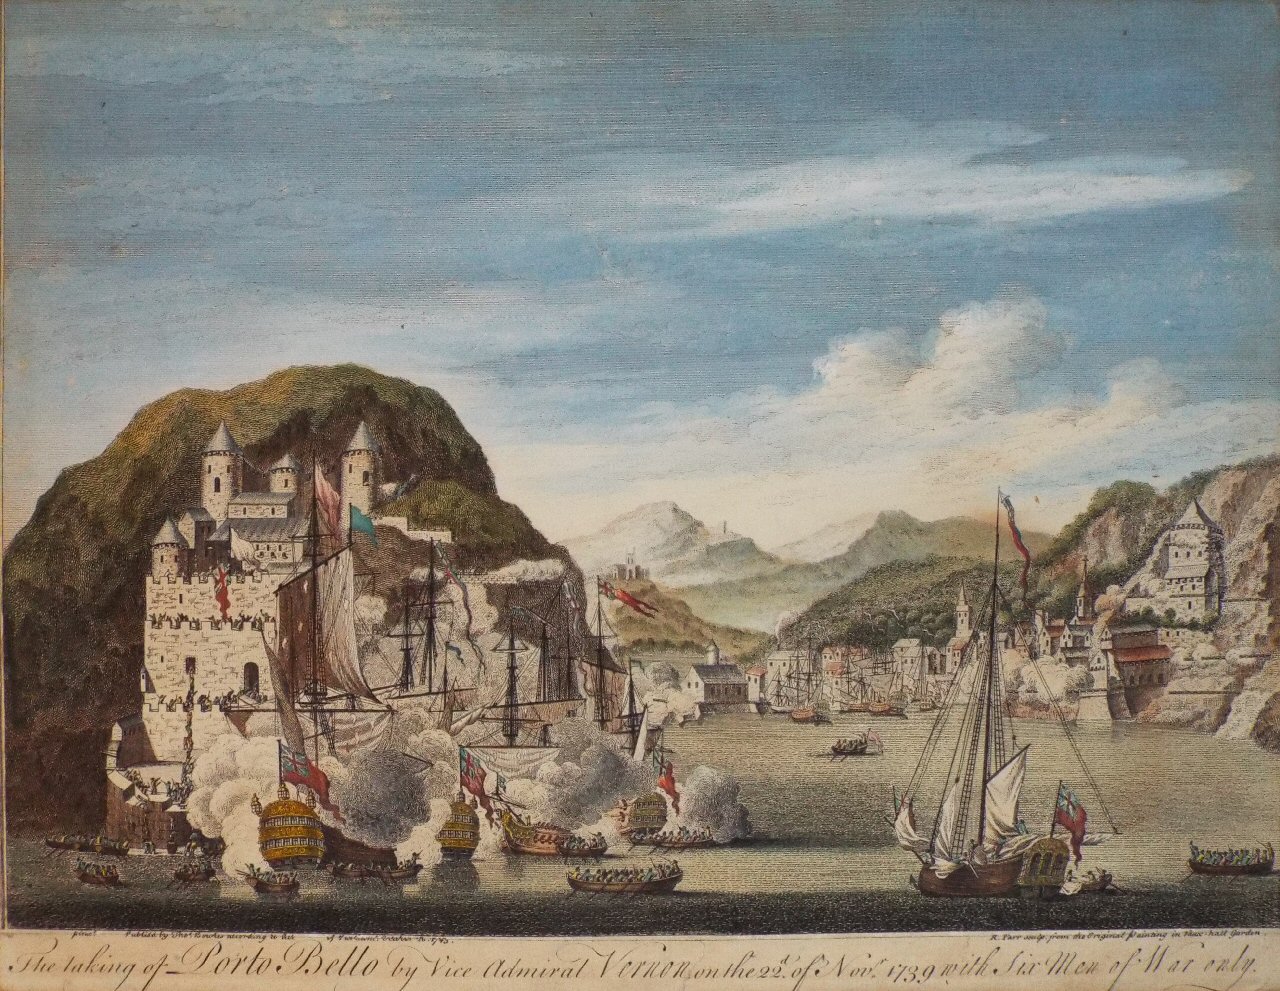 Print - The Taking of Porto Bello by Vice Admiral Vernon on the 22d. of Novr. 1739 with Six Men of War only. - Parr